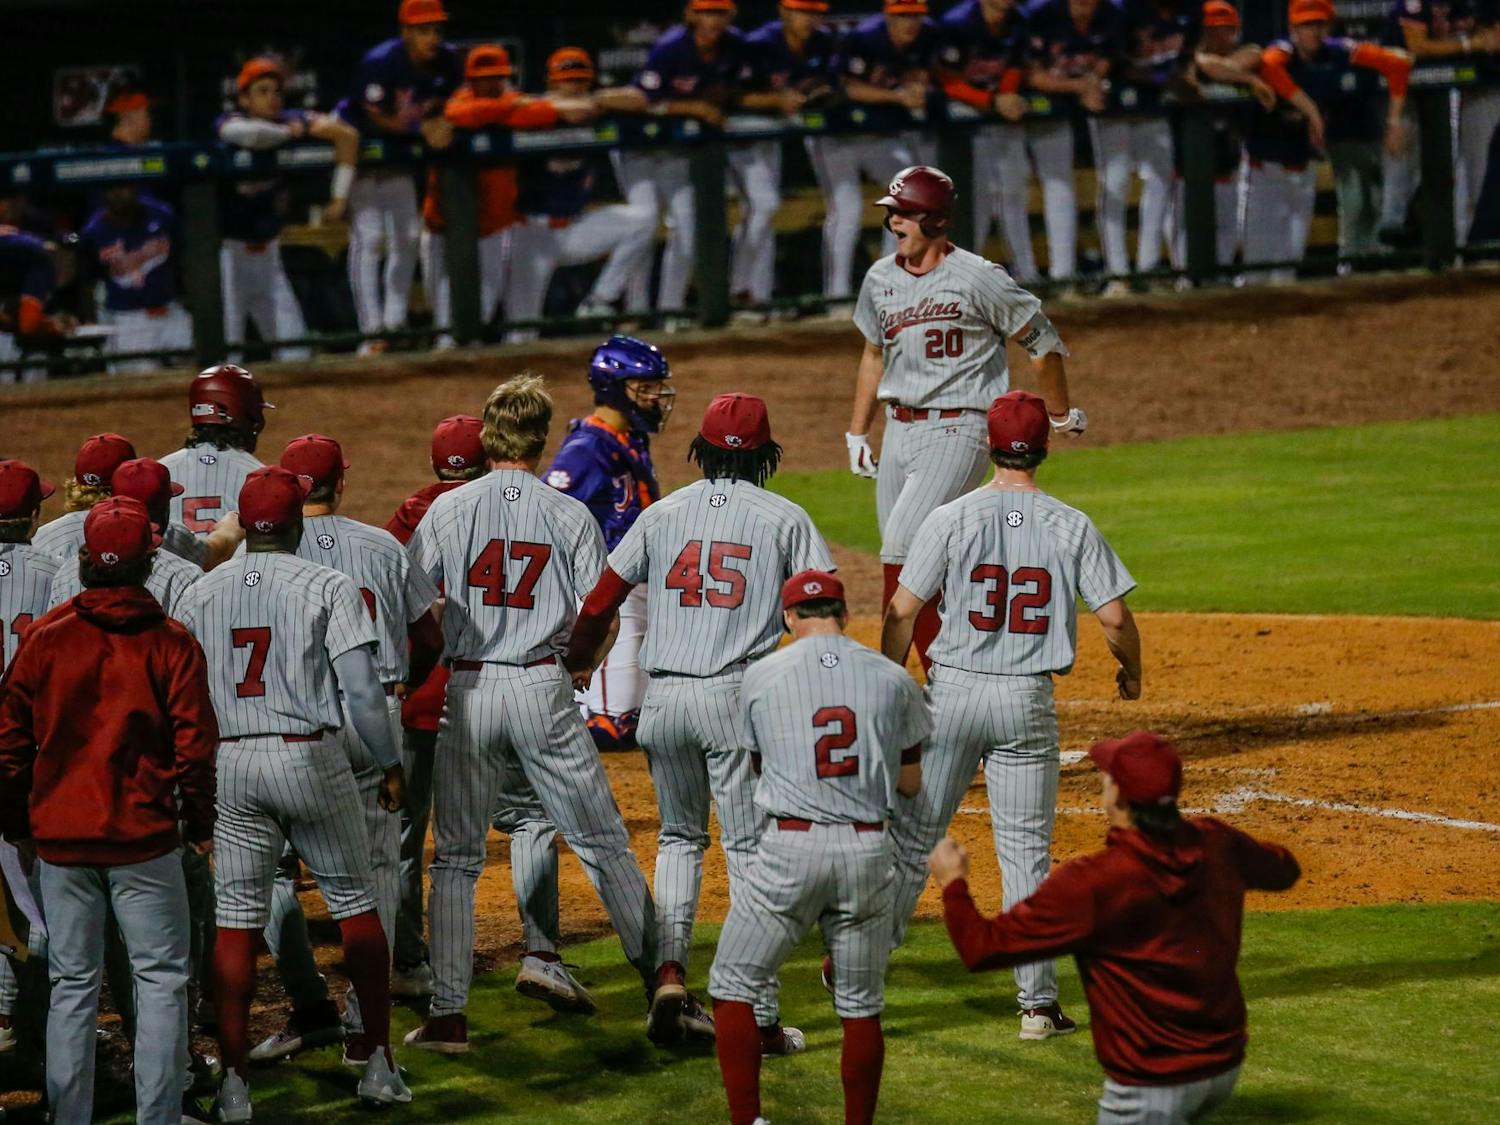 Members of the Gamecock baseball team celebrate as sophomore outfielder Ethan Petry crosses the plate after hitting a homerun during South Carolina’s game against Clemson at Segra Park on March 2, 2024. The “Battle at Bull Street” game ended with the Gamecocks losing 5-4 to the Tigers after 12 innings of play.